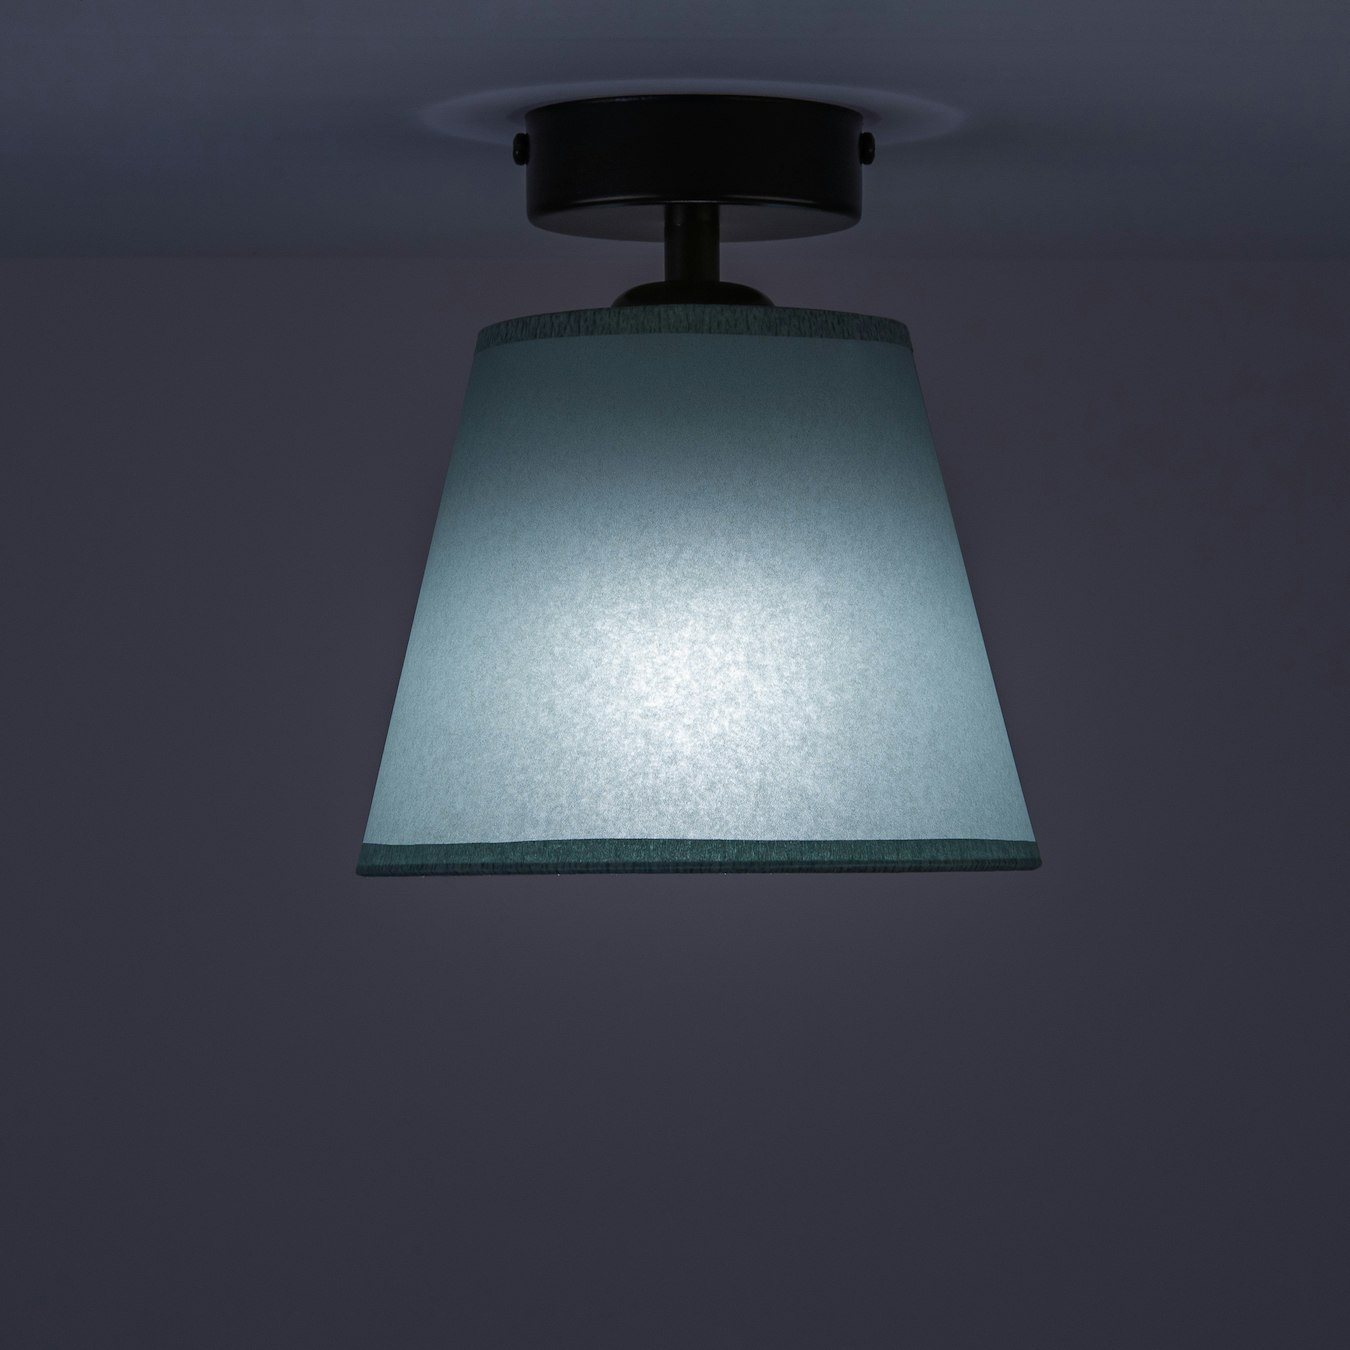 Iro 1 Ceiling Lamp In Olive Green